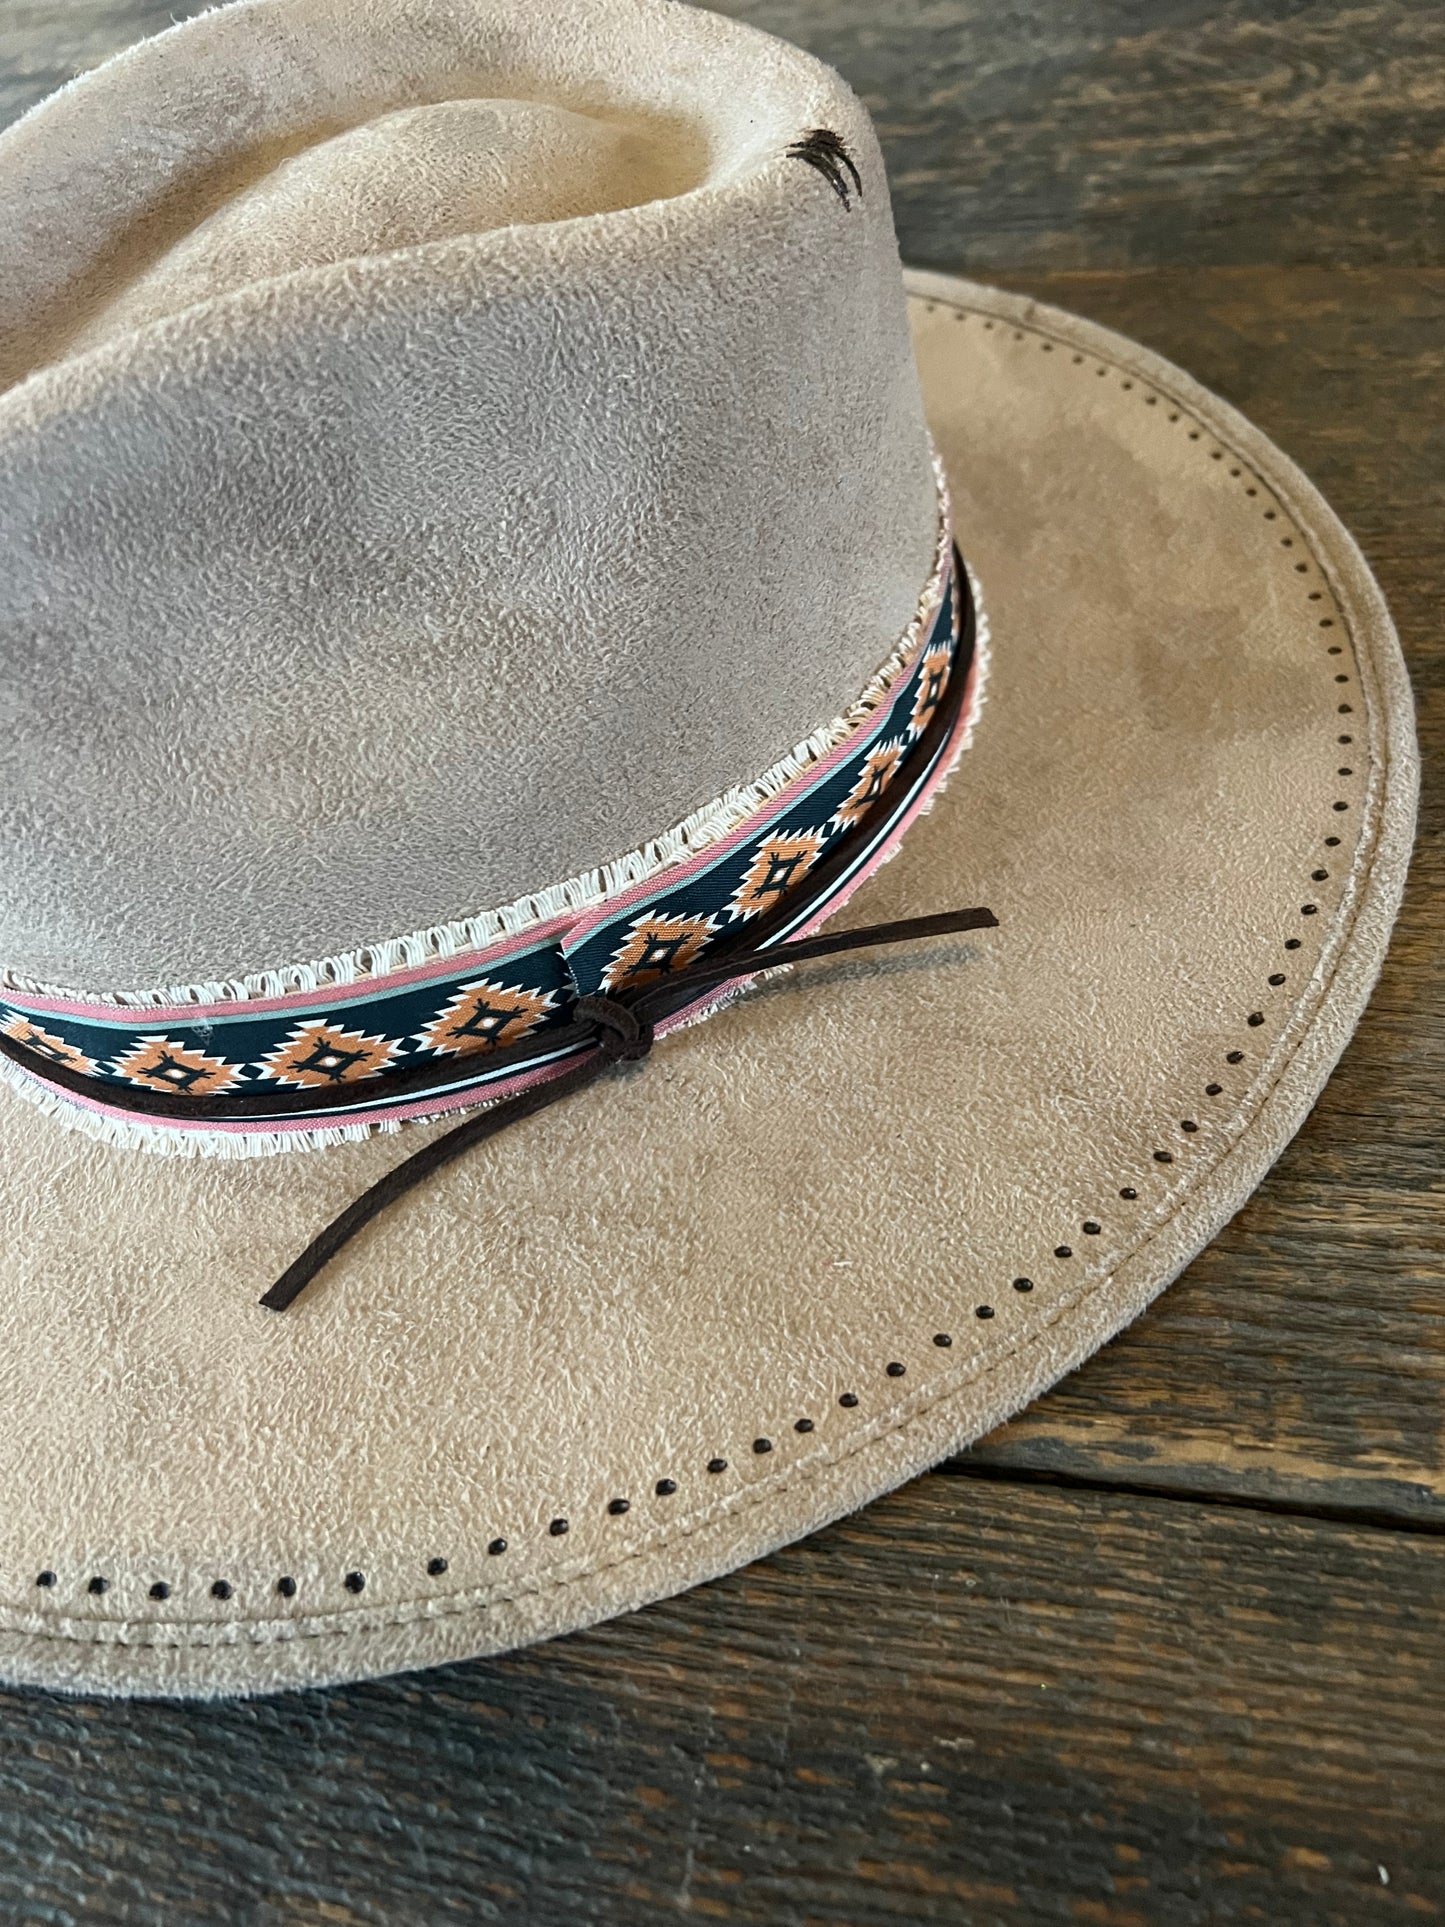 #141 - Simple Southwest Western or Rancher Hat